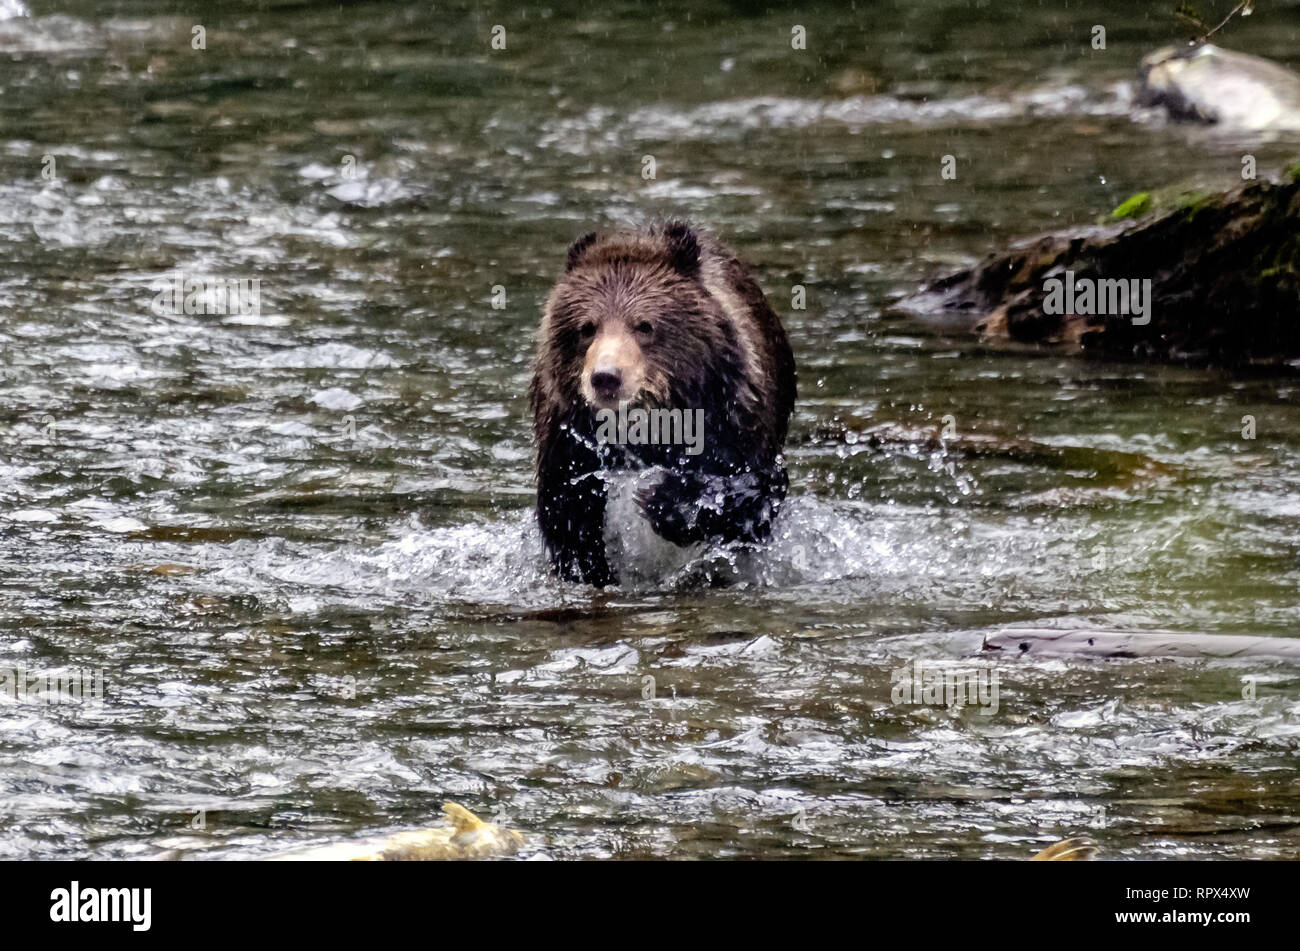 Grizzly bear Cub running in a river, British Columbia, Canada Stock Photo